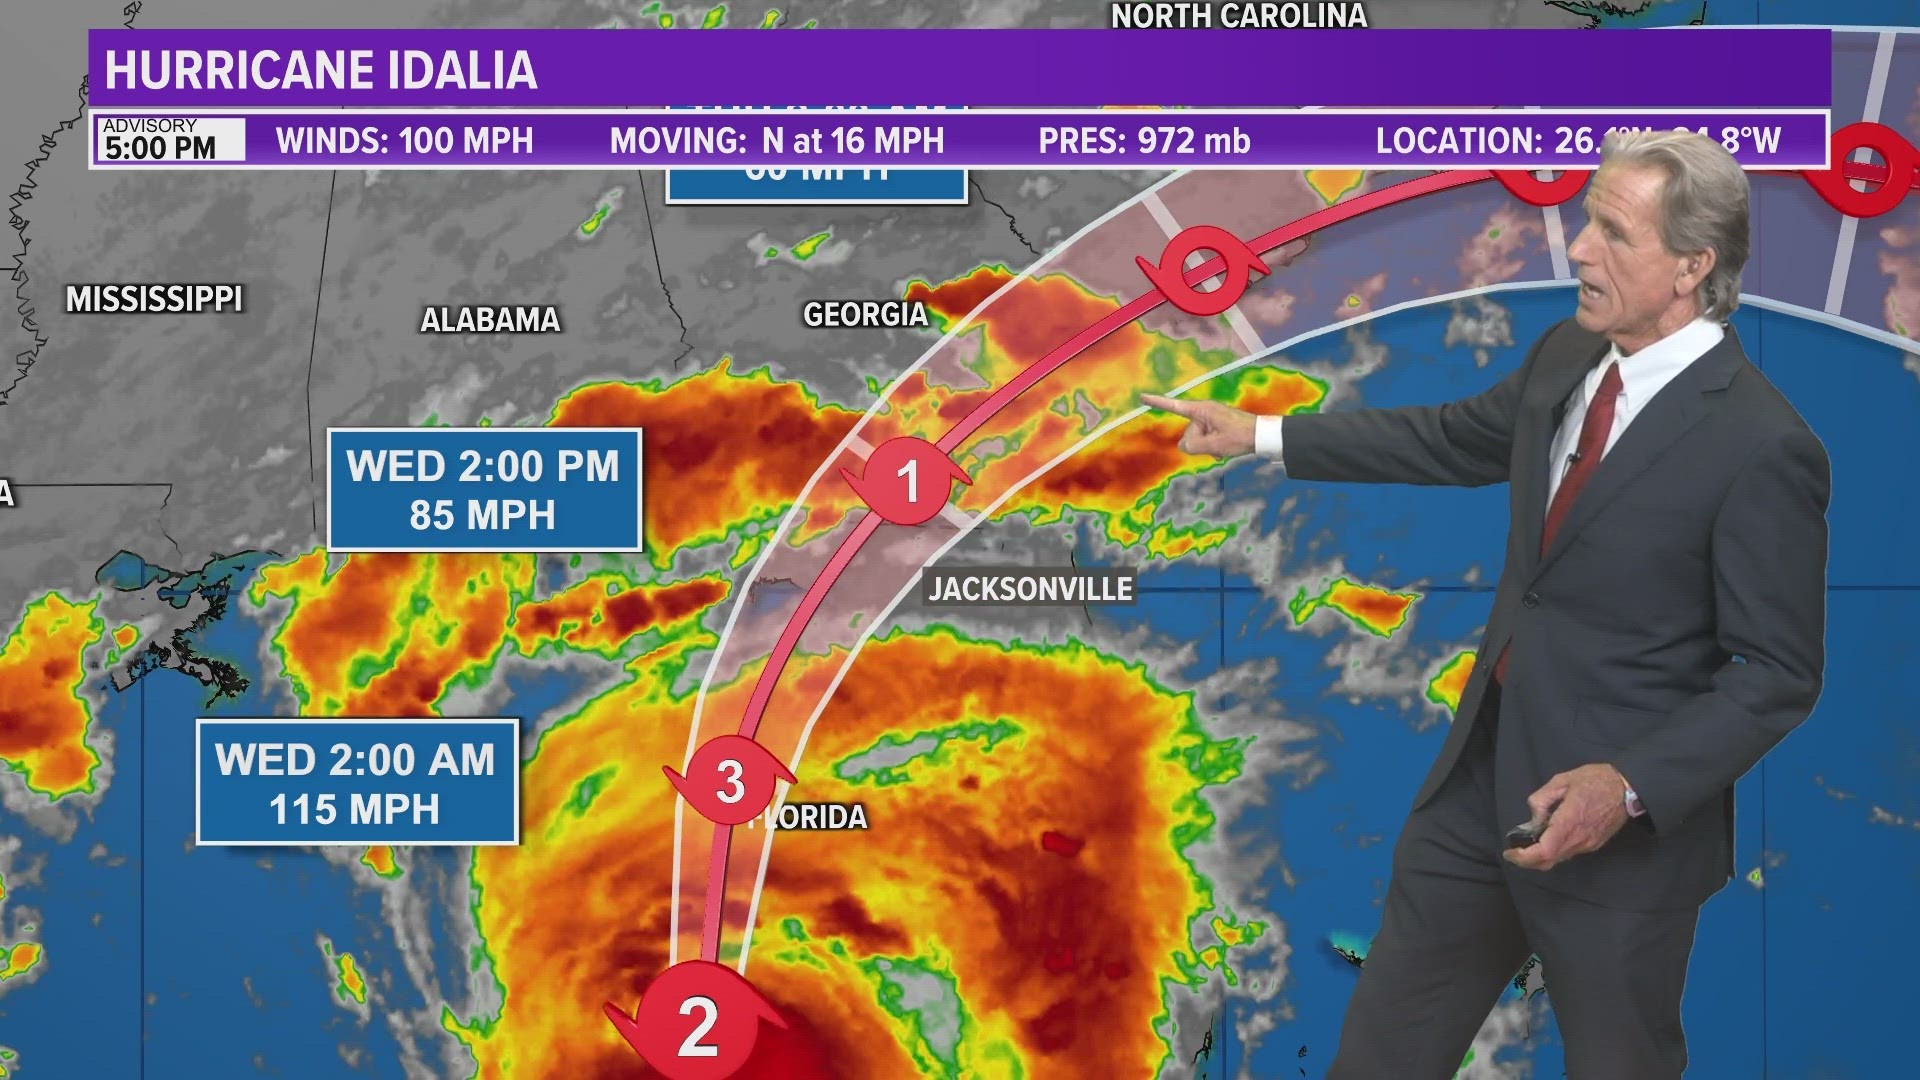 Idalia is now a Category 2 hurricane and is expected to continue to make landfall in the Big Bend region of Florida.